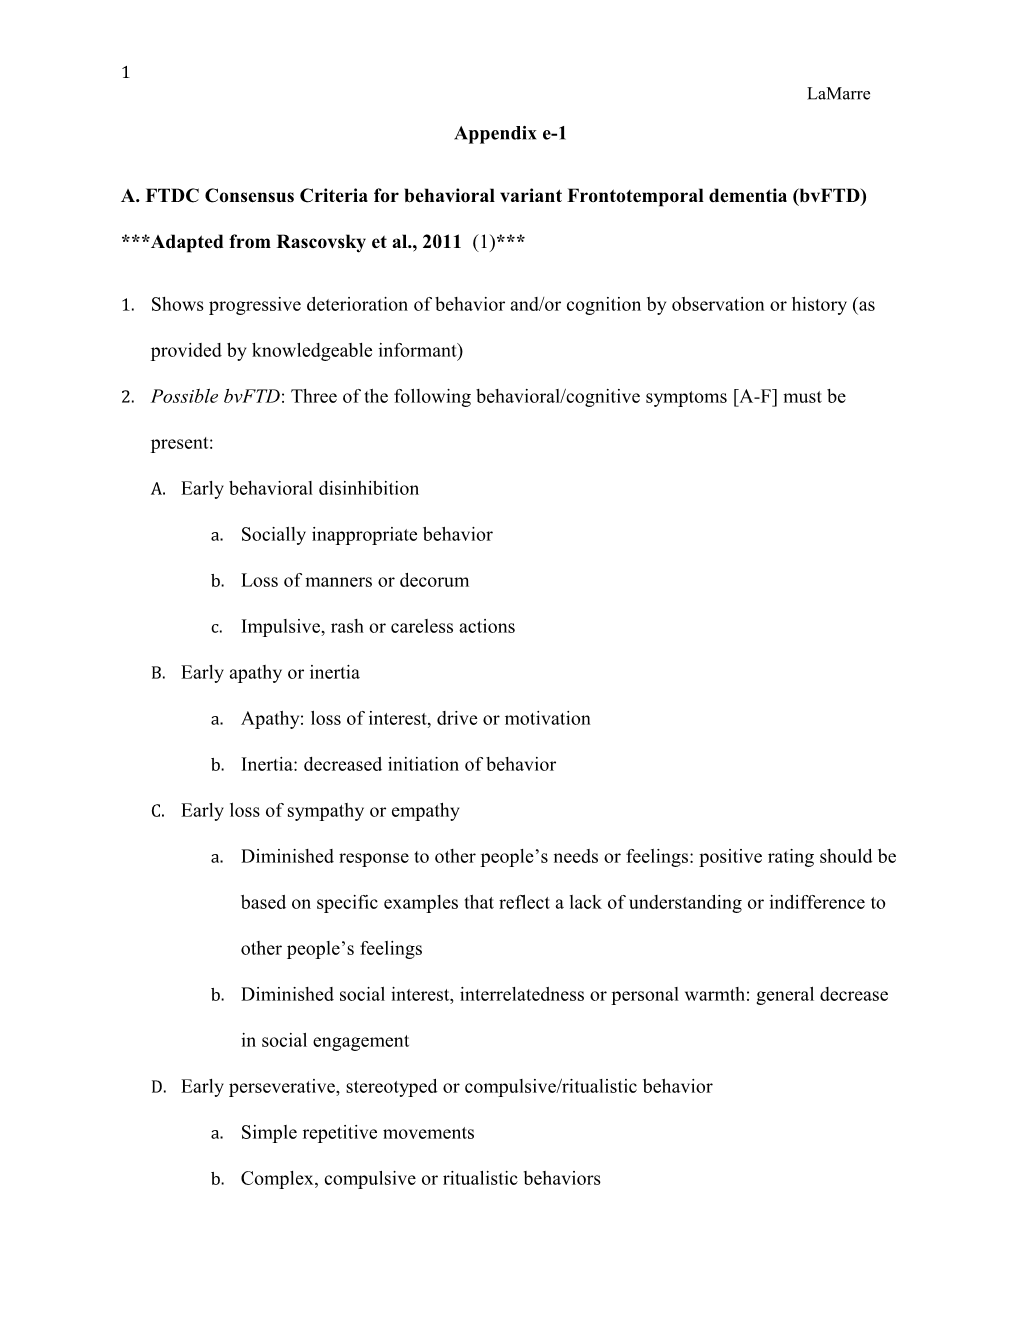 A. FTDC Consensus Criteria for Behavioral Variant Frontotemporal Dementia (Bvftd) Adapted